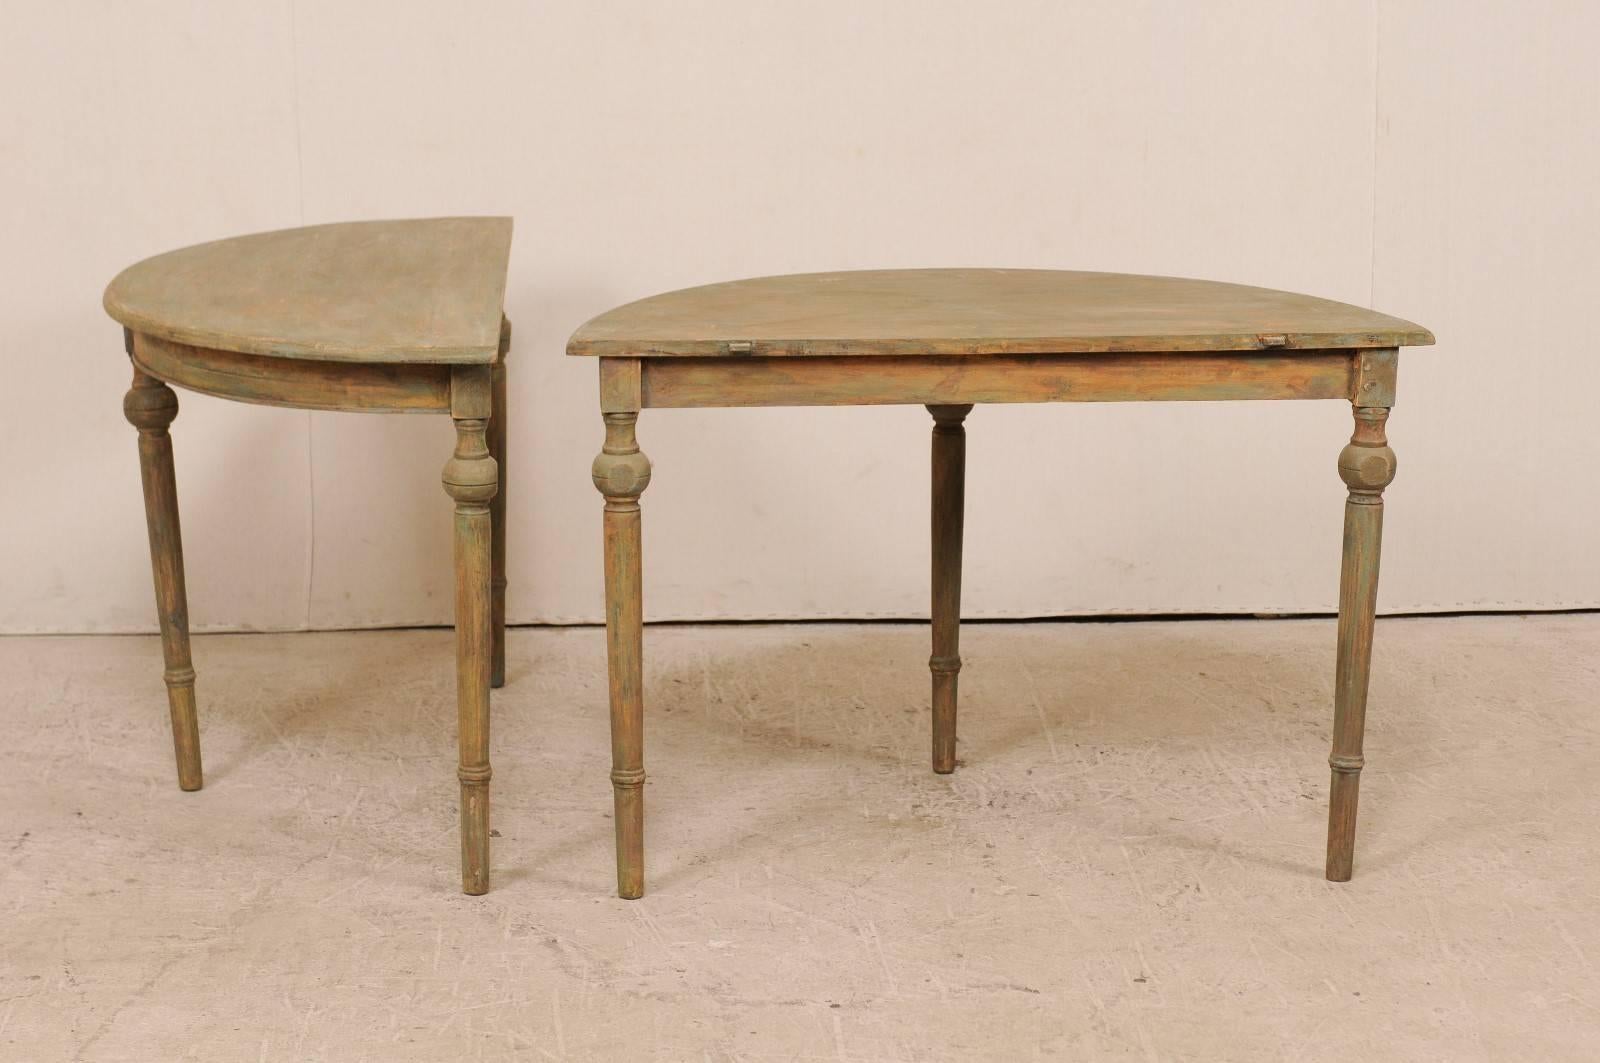 Pair of 19th Century Swedish Painted Wood Demilune Tables in Warm Sage Hues 5